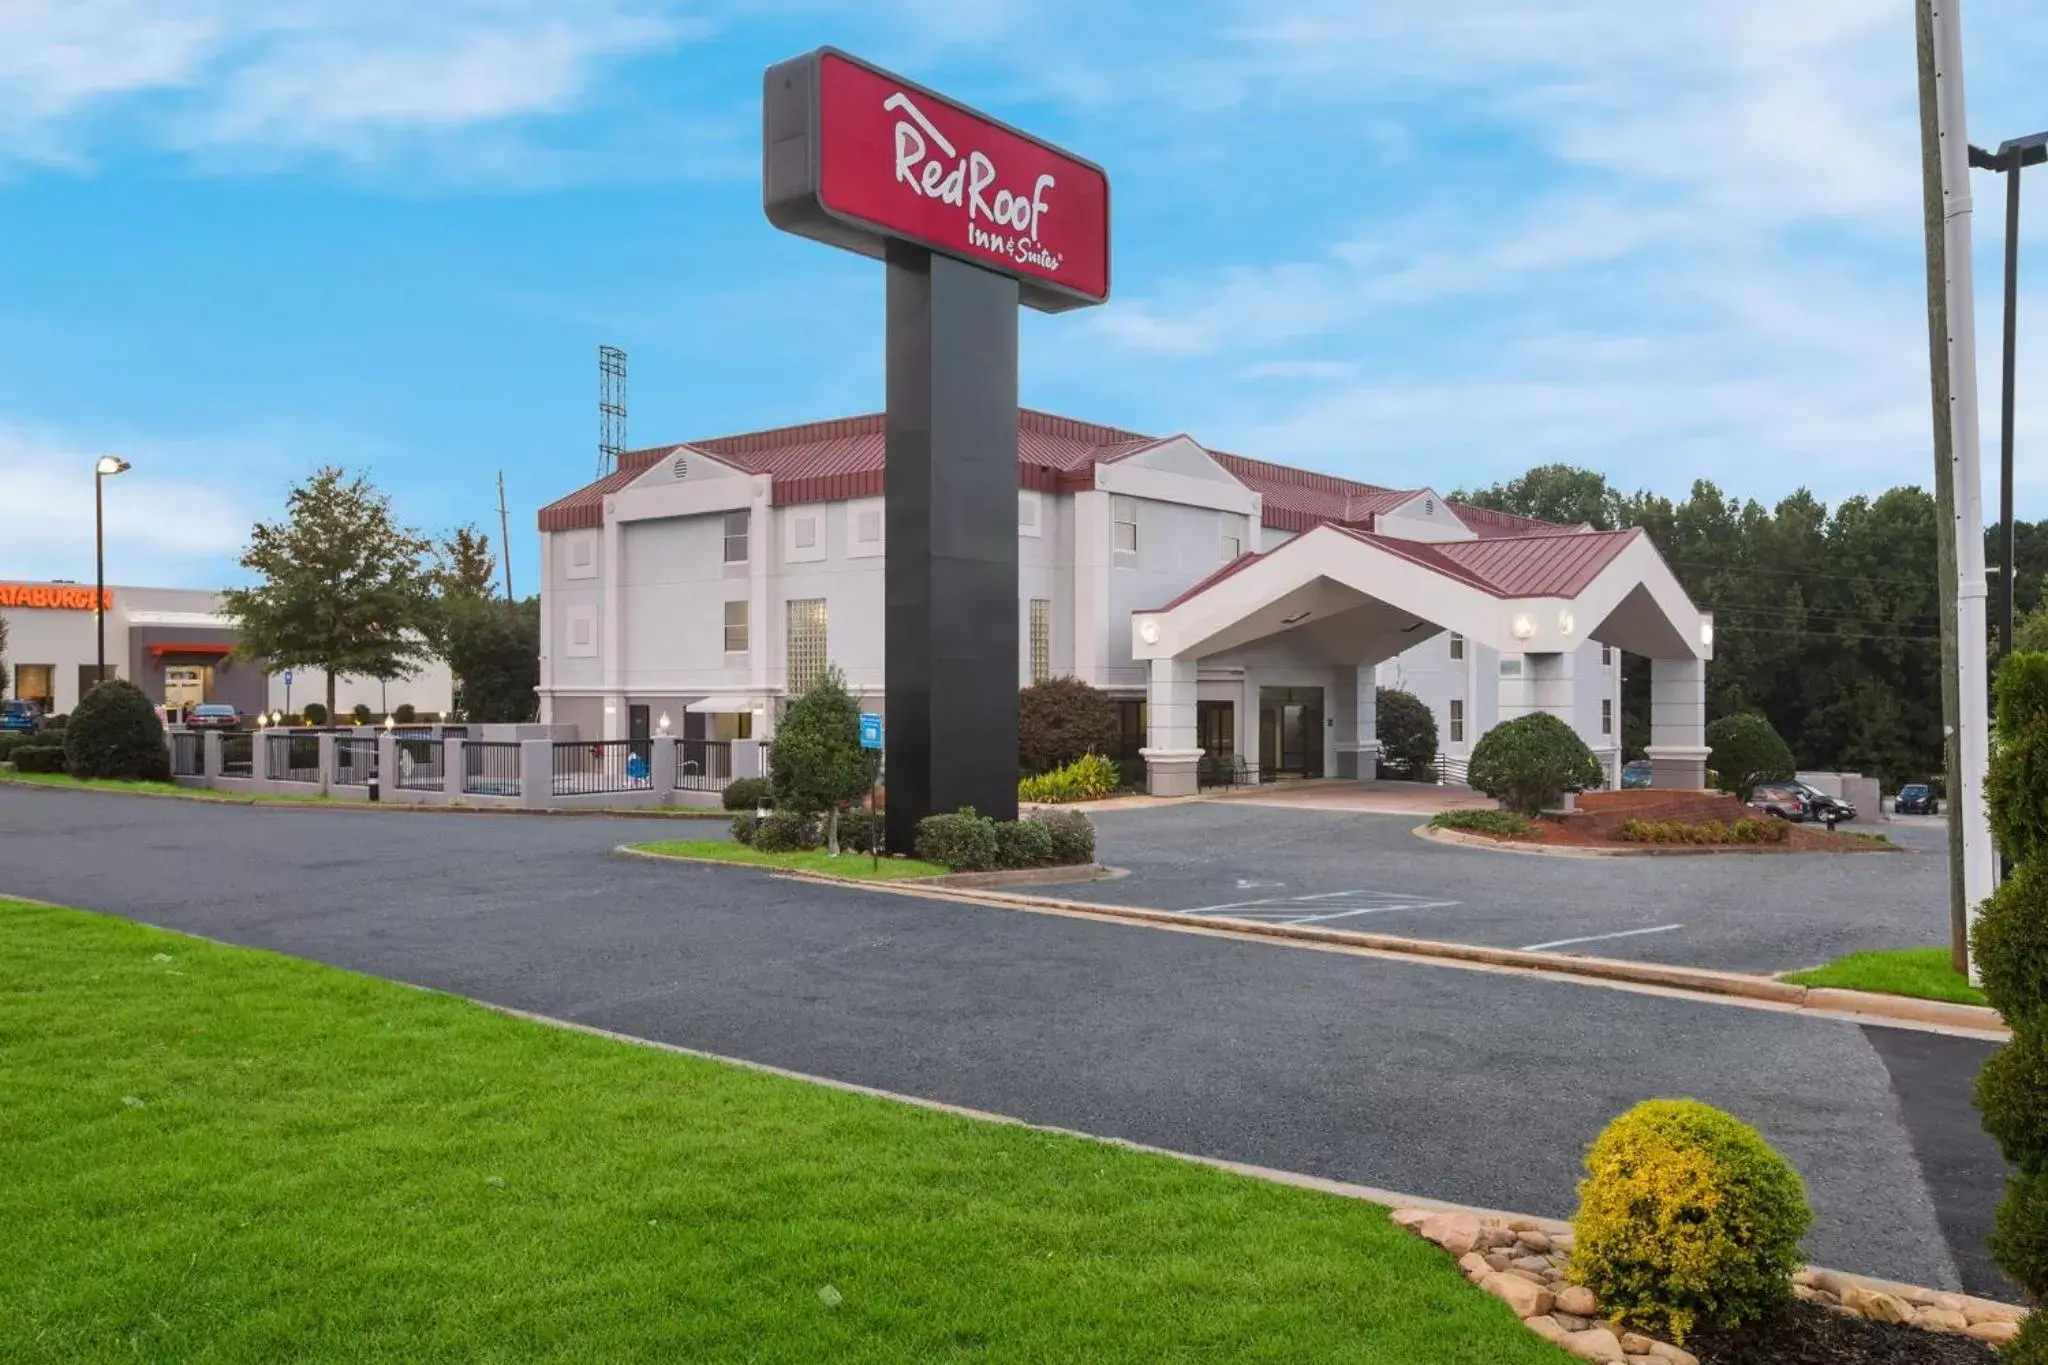 Property Building in Red Roof Inn & Suites Newnan